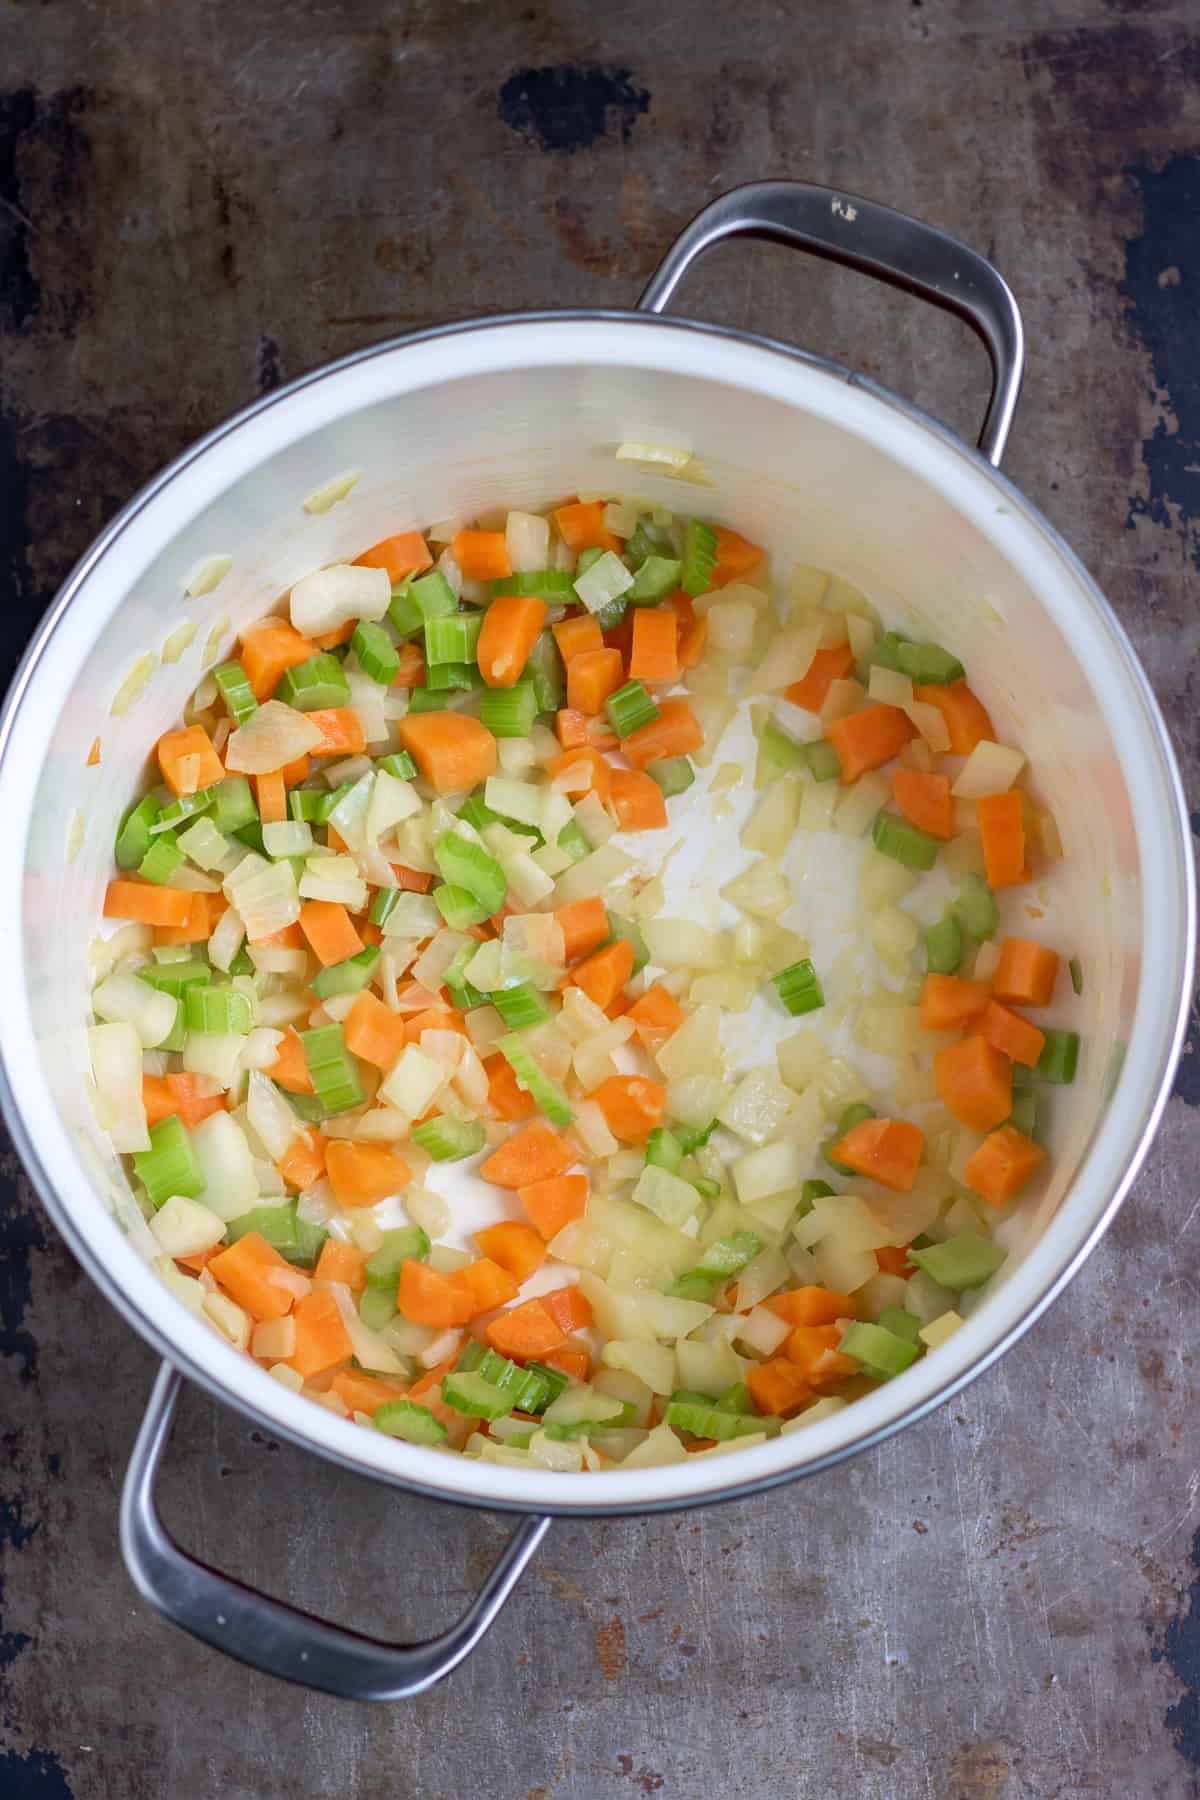 Sauteeing carrots, onion and celery.